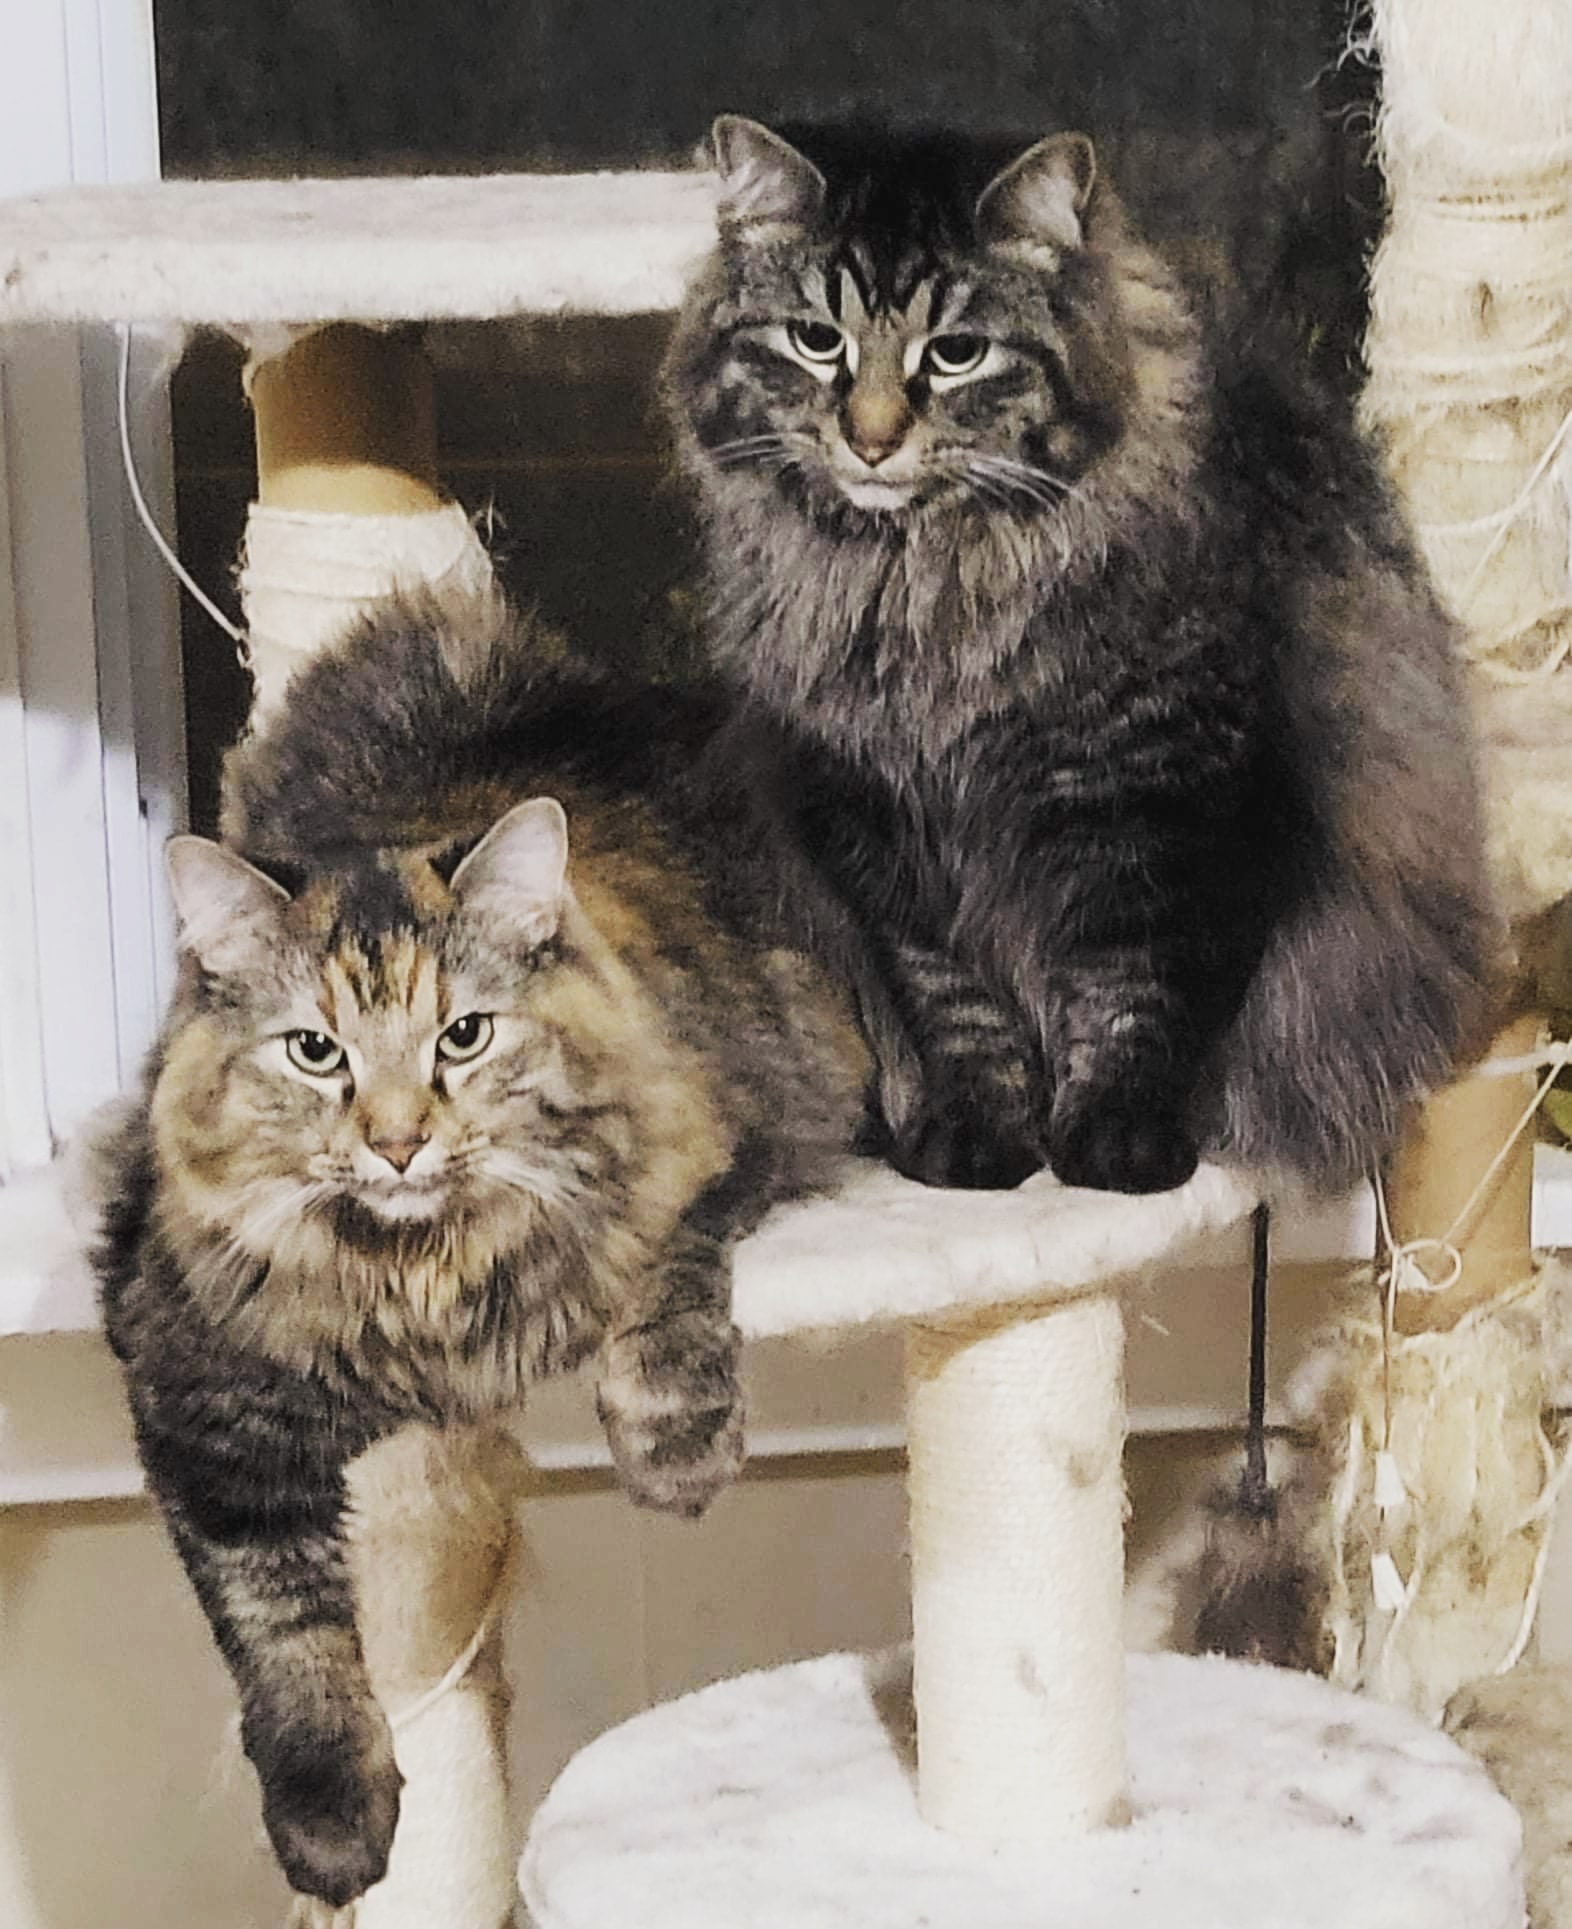 two big striped brown cats sitting together on a cat tree